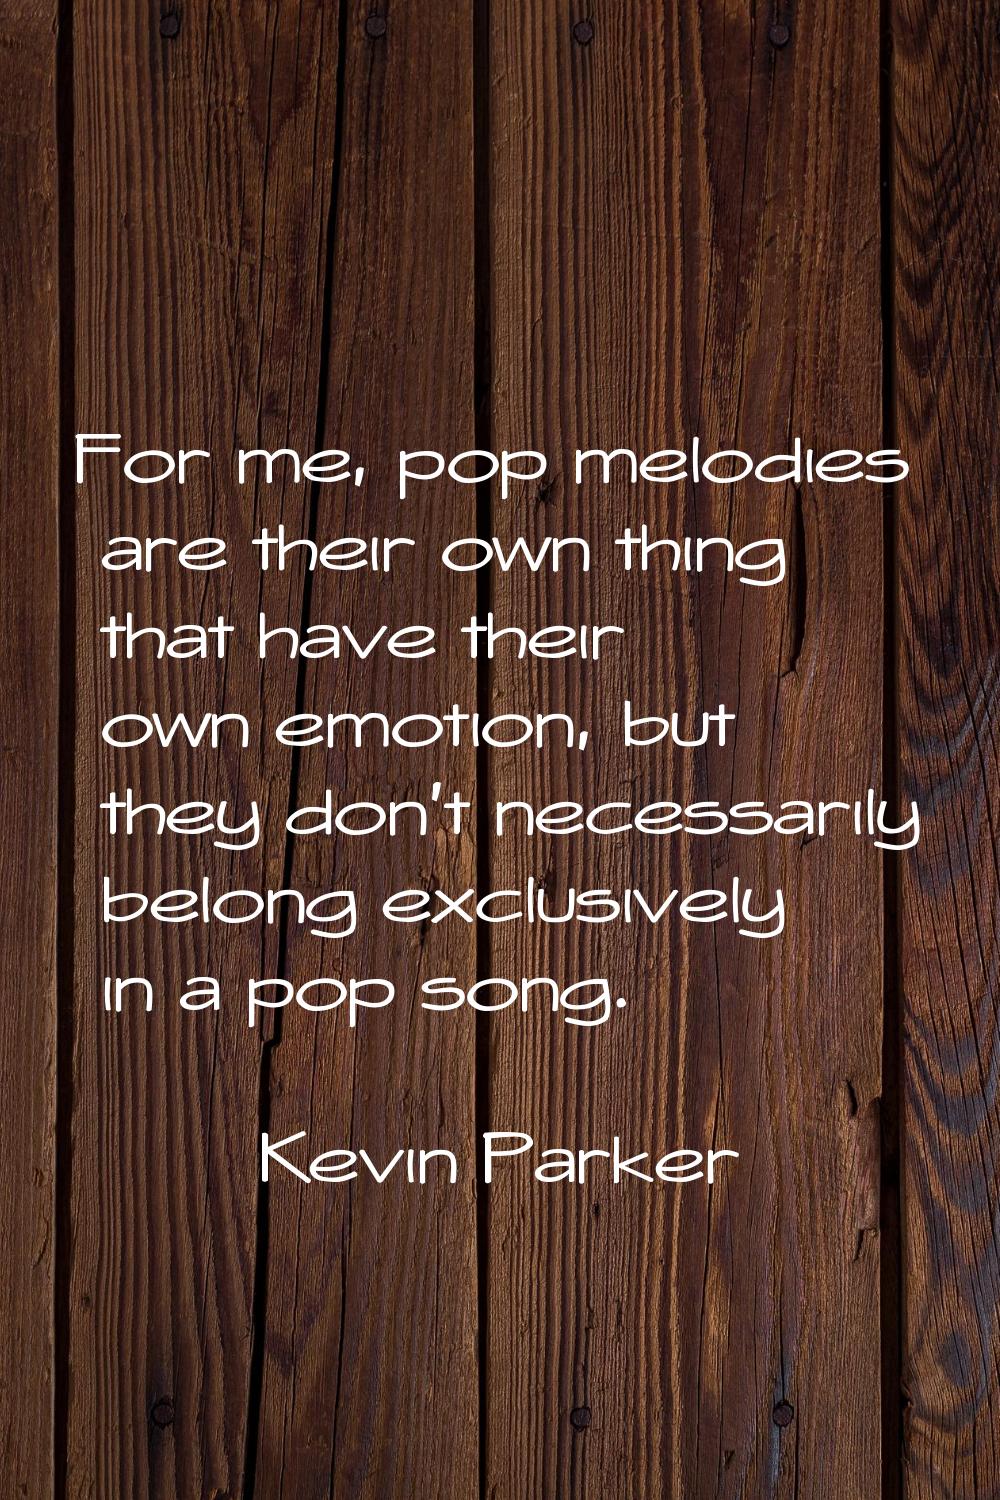 For me, pop melodies are their own thing that have their own emotion, but they don't necessarily be